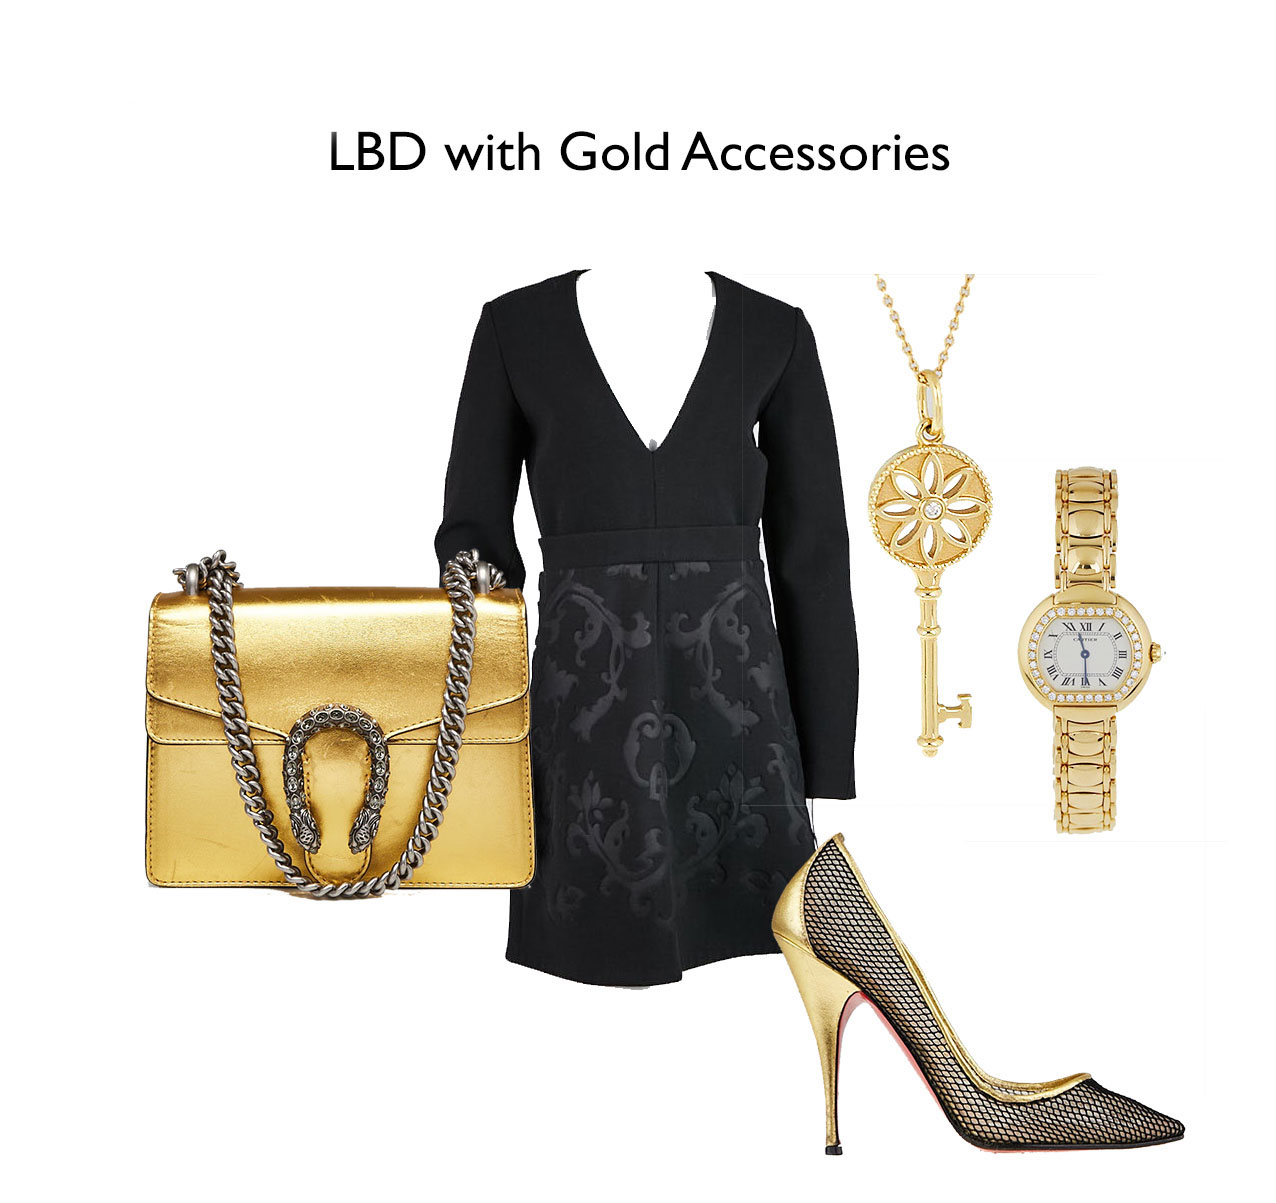 Black and Gold Holiday Party Outfit Idea For Christmas | Yoogi's Closet Authenticated Pre-Owned Luxury yoogsicloset.com